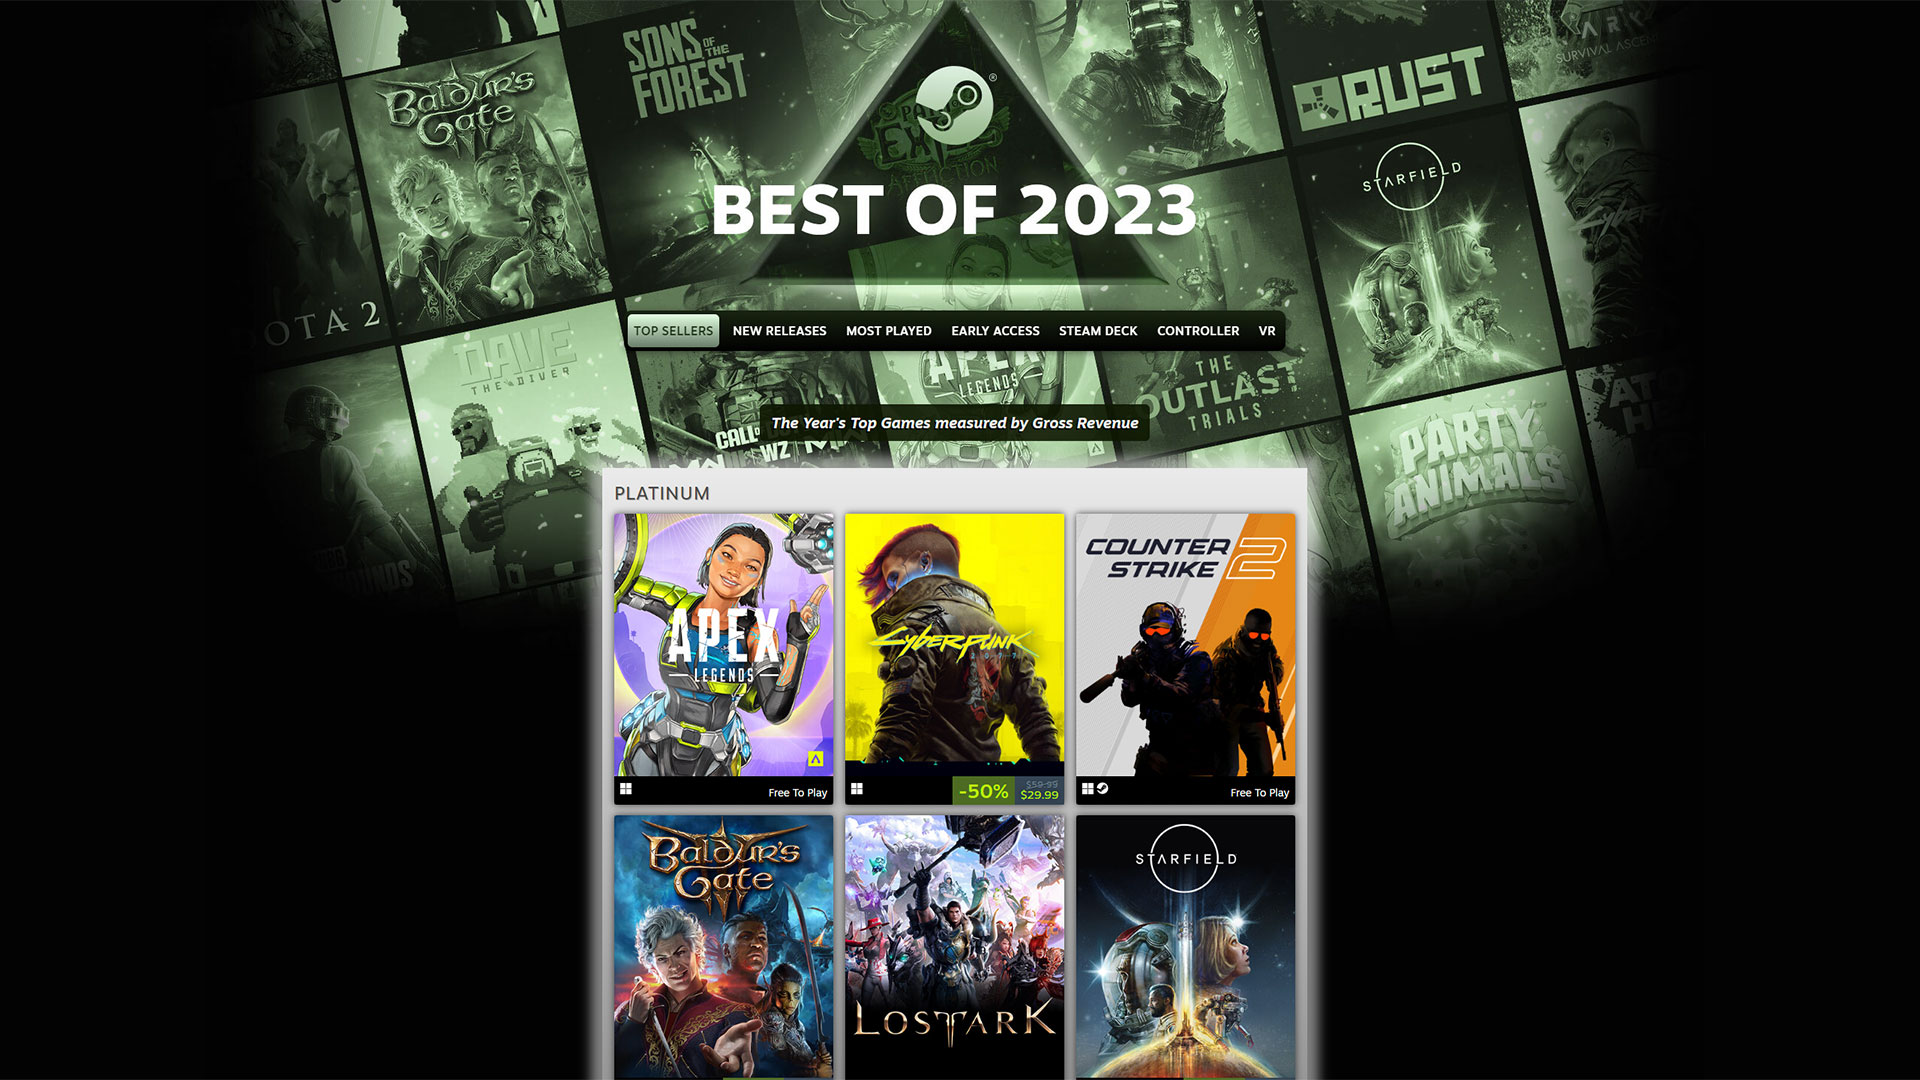 Steam has shared its Best of 2023, revealing top games across several categories